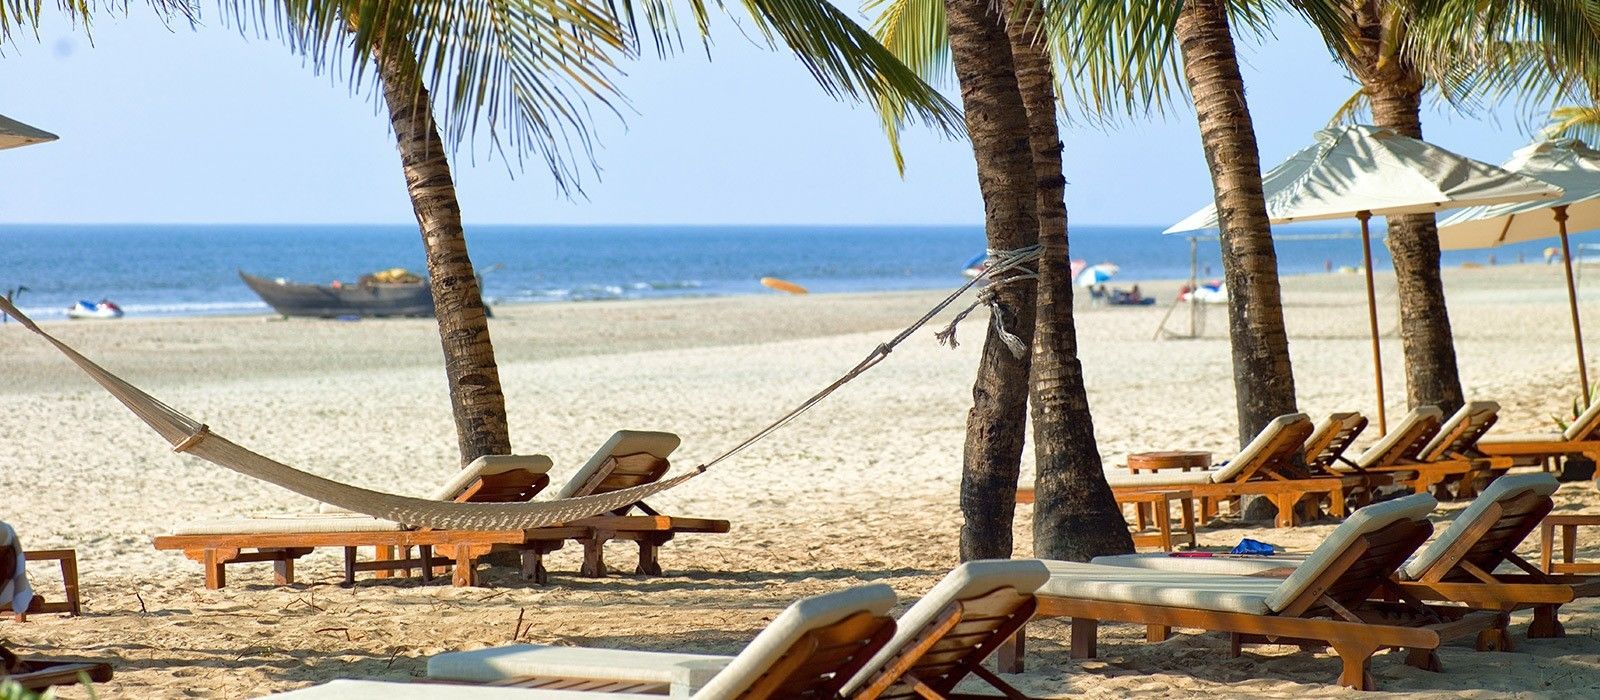 Wondering when's the best time to visit Goa? Here's the answer.